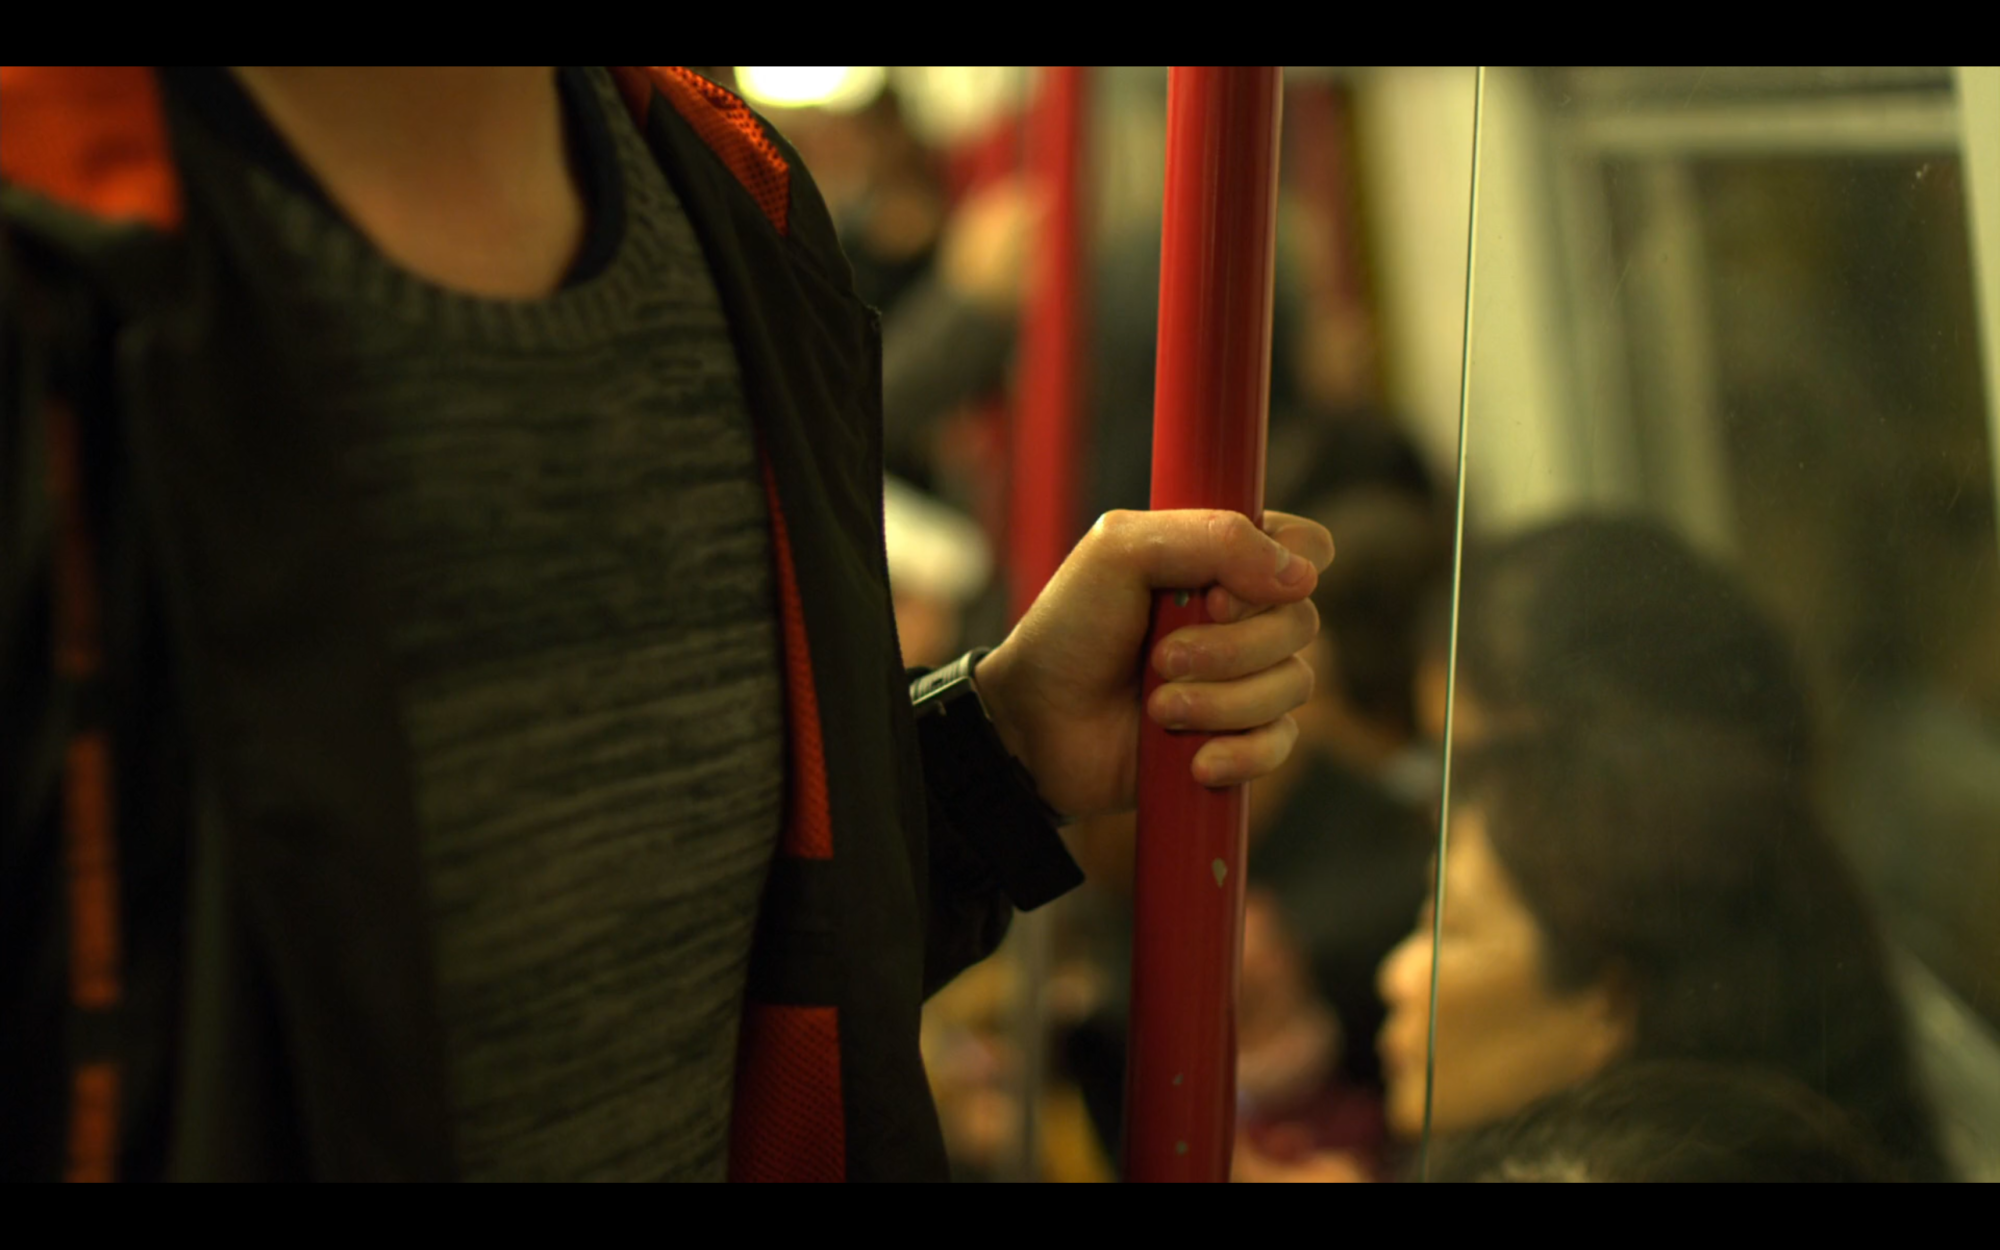 shot of hand in focus holding on to a red pole inside a crowded train car